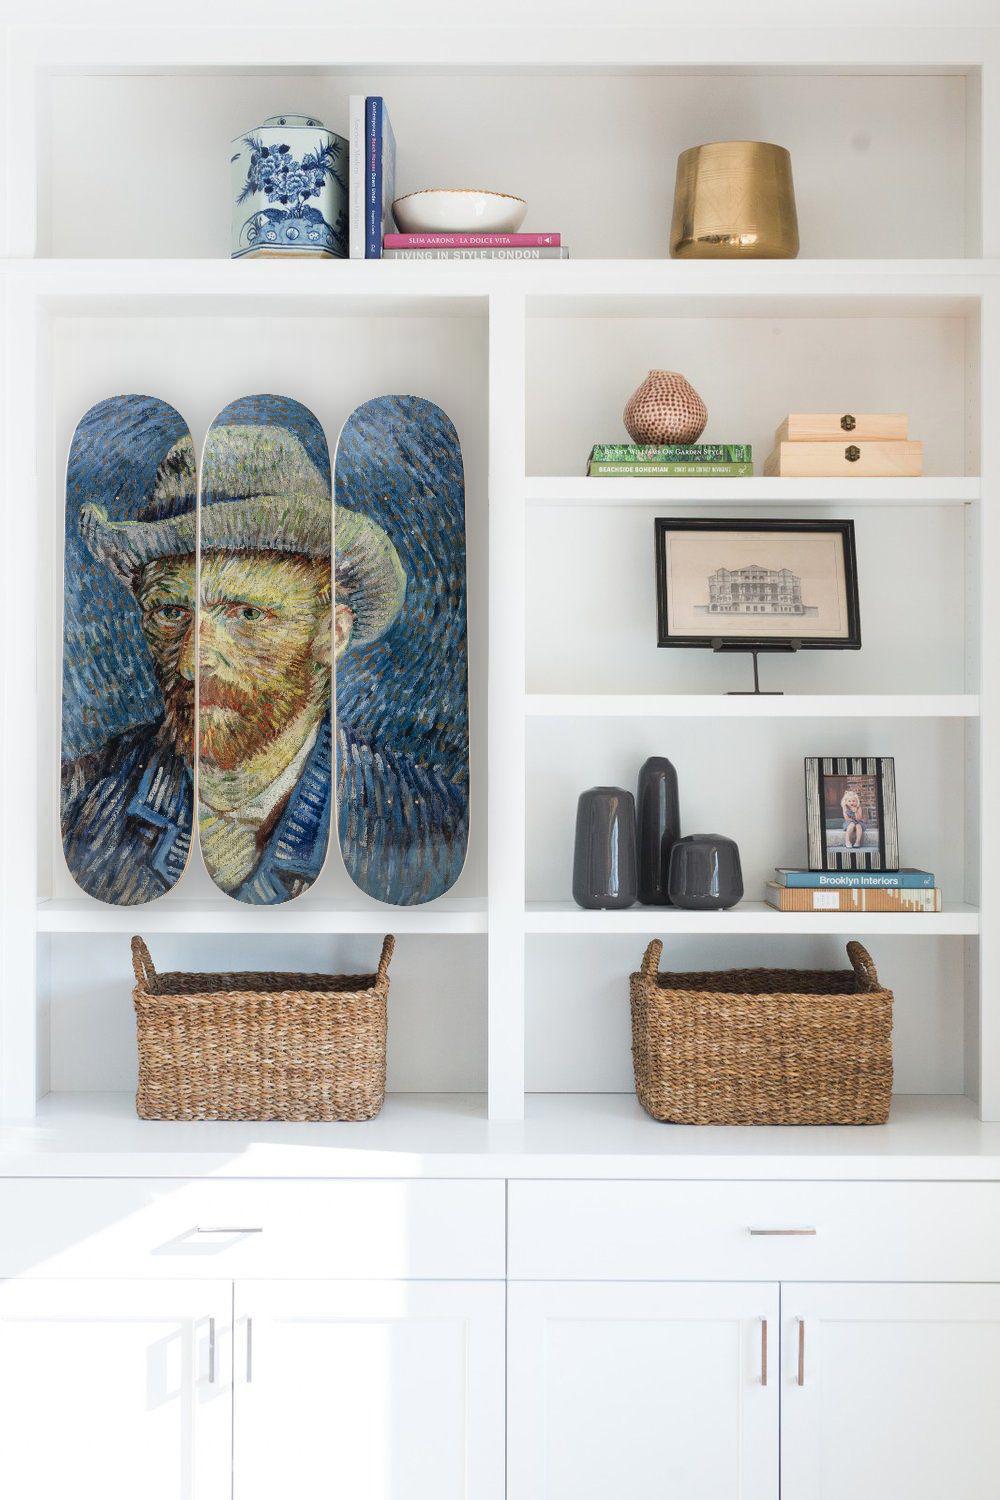 The Skateroom with the Van Gogh Museum
set of three skateboard decks
7-ply Canadian maplewood with screenprint
Measures: each: 31 H x 8 inches
approx. 31 H x 24 inches when installed
mounting hardware included
open edition (screen-printed